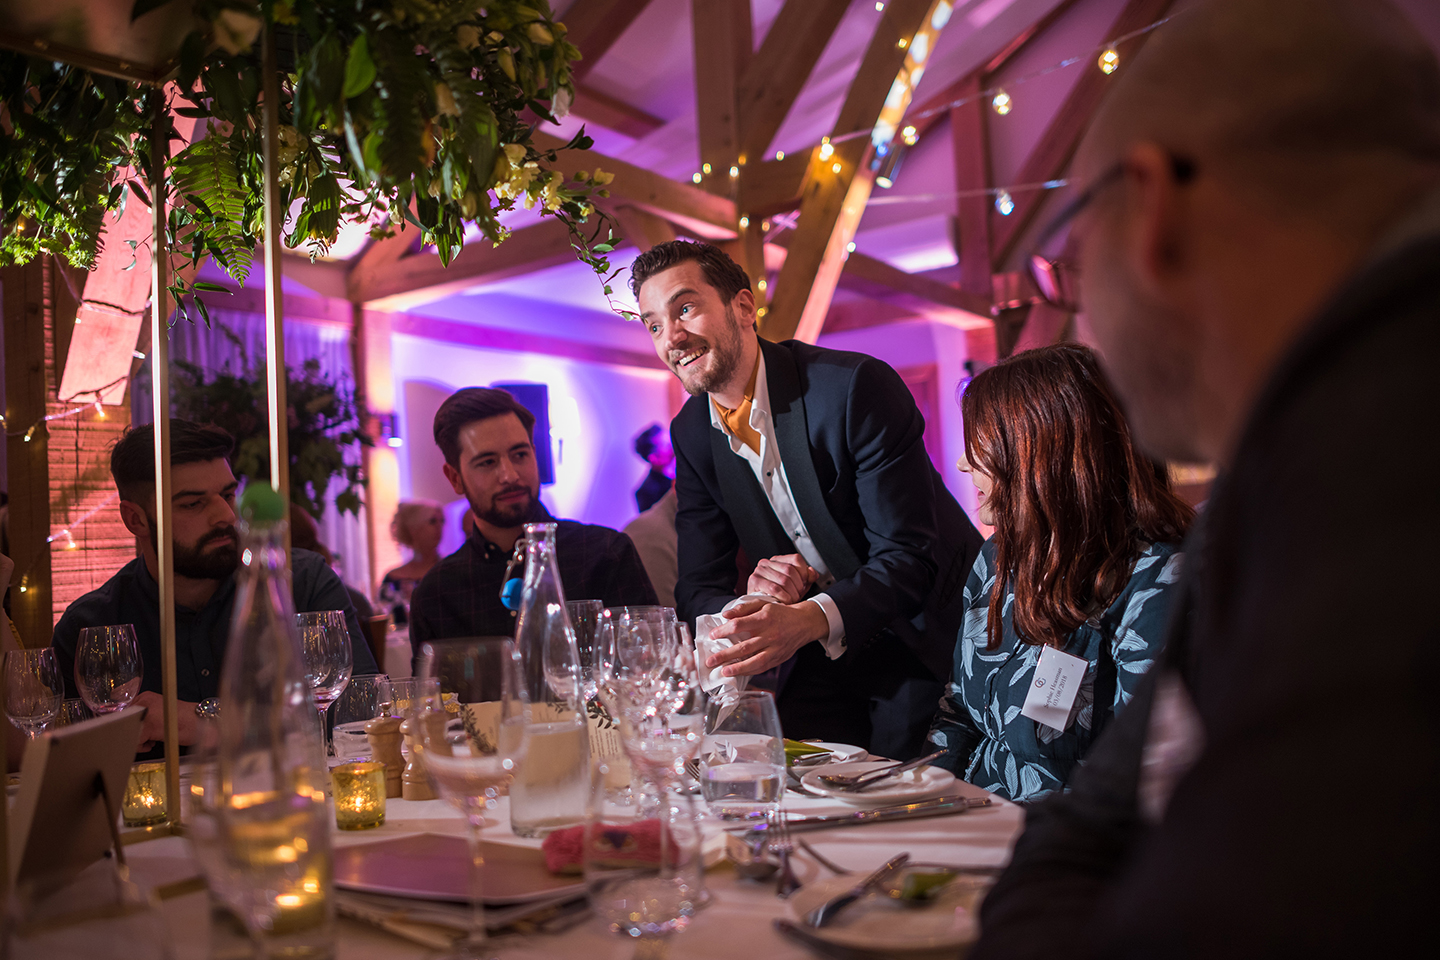 A wedding magician entertains guests during a tasting event at Bassmead Manor Barns